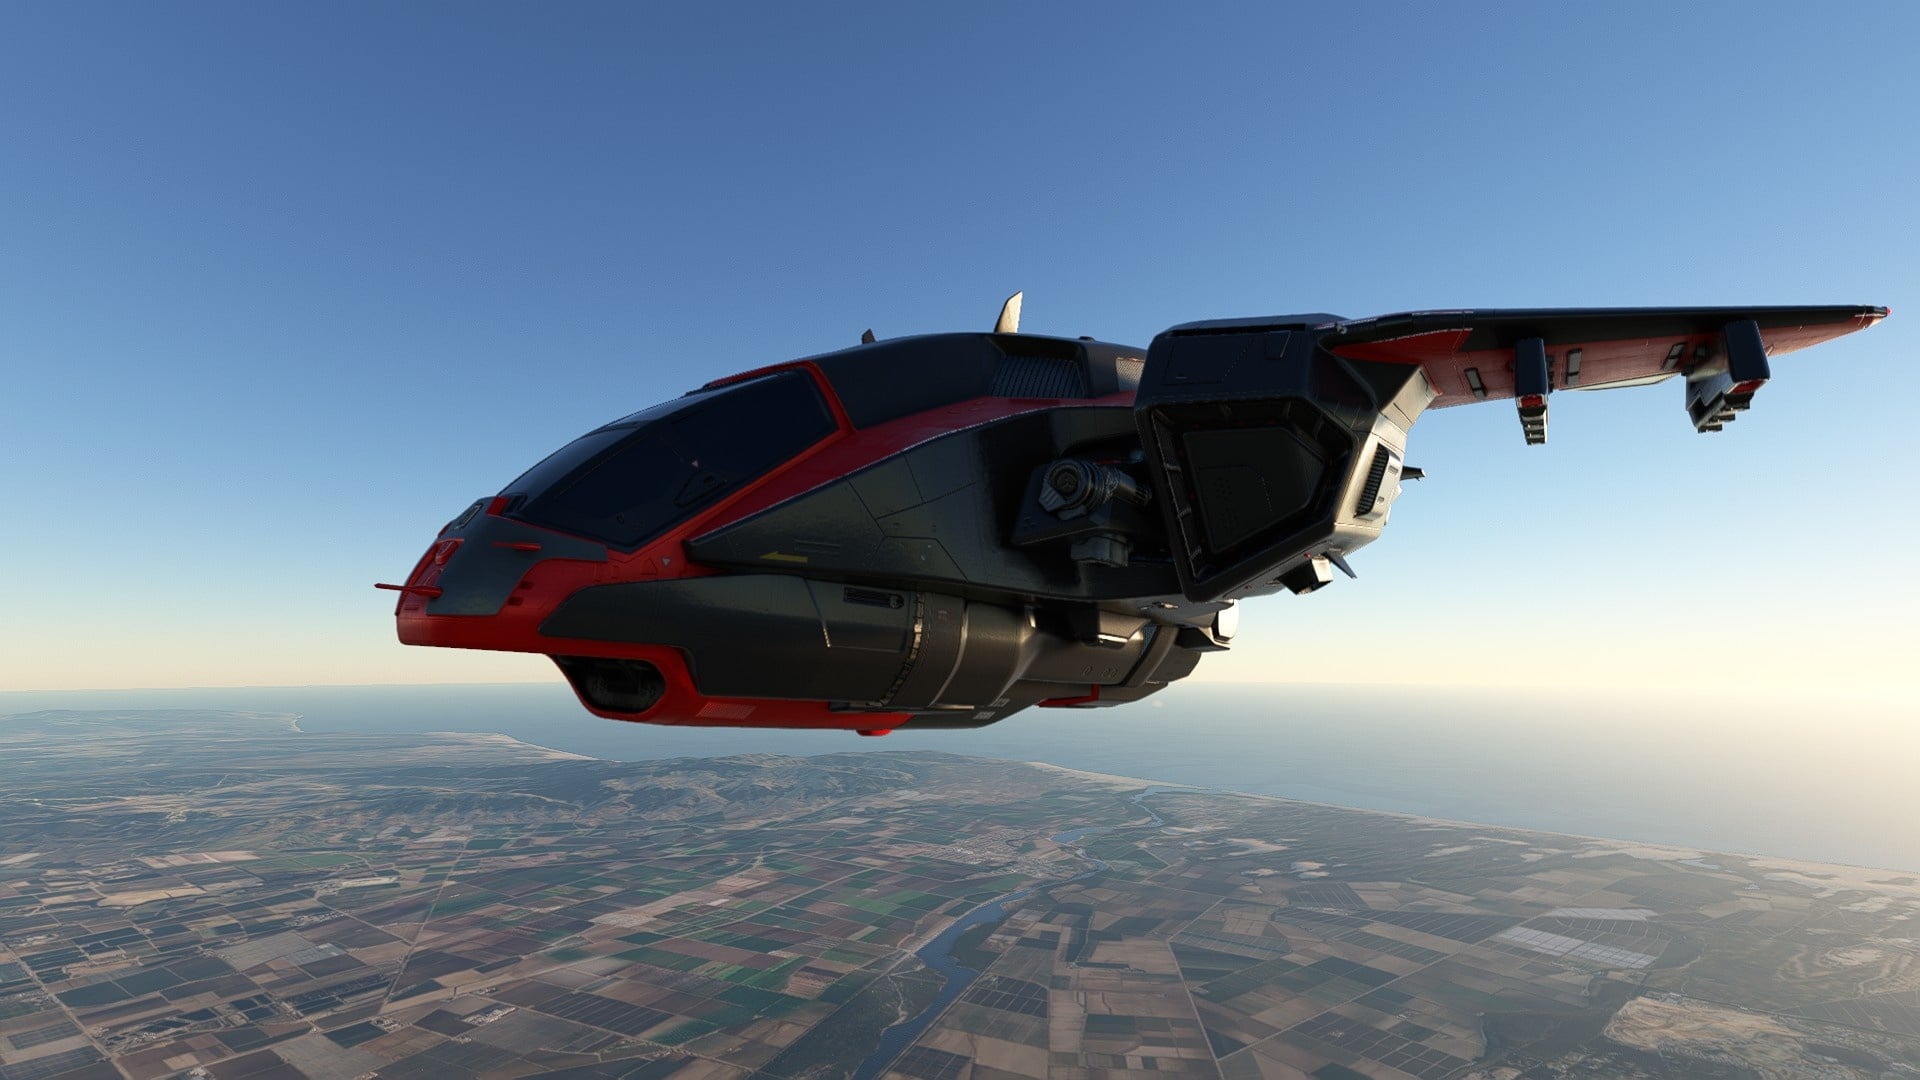 (The Misriah Armory D77 TC Pelican comes from Microsoft's Halo series and has recently been available in several liveries as free DLC in Flight Simulator's marketplace)